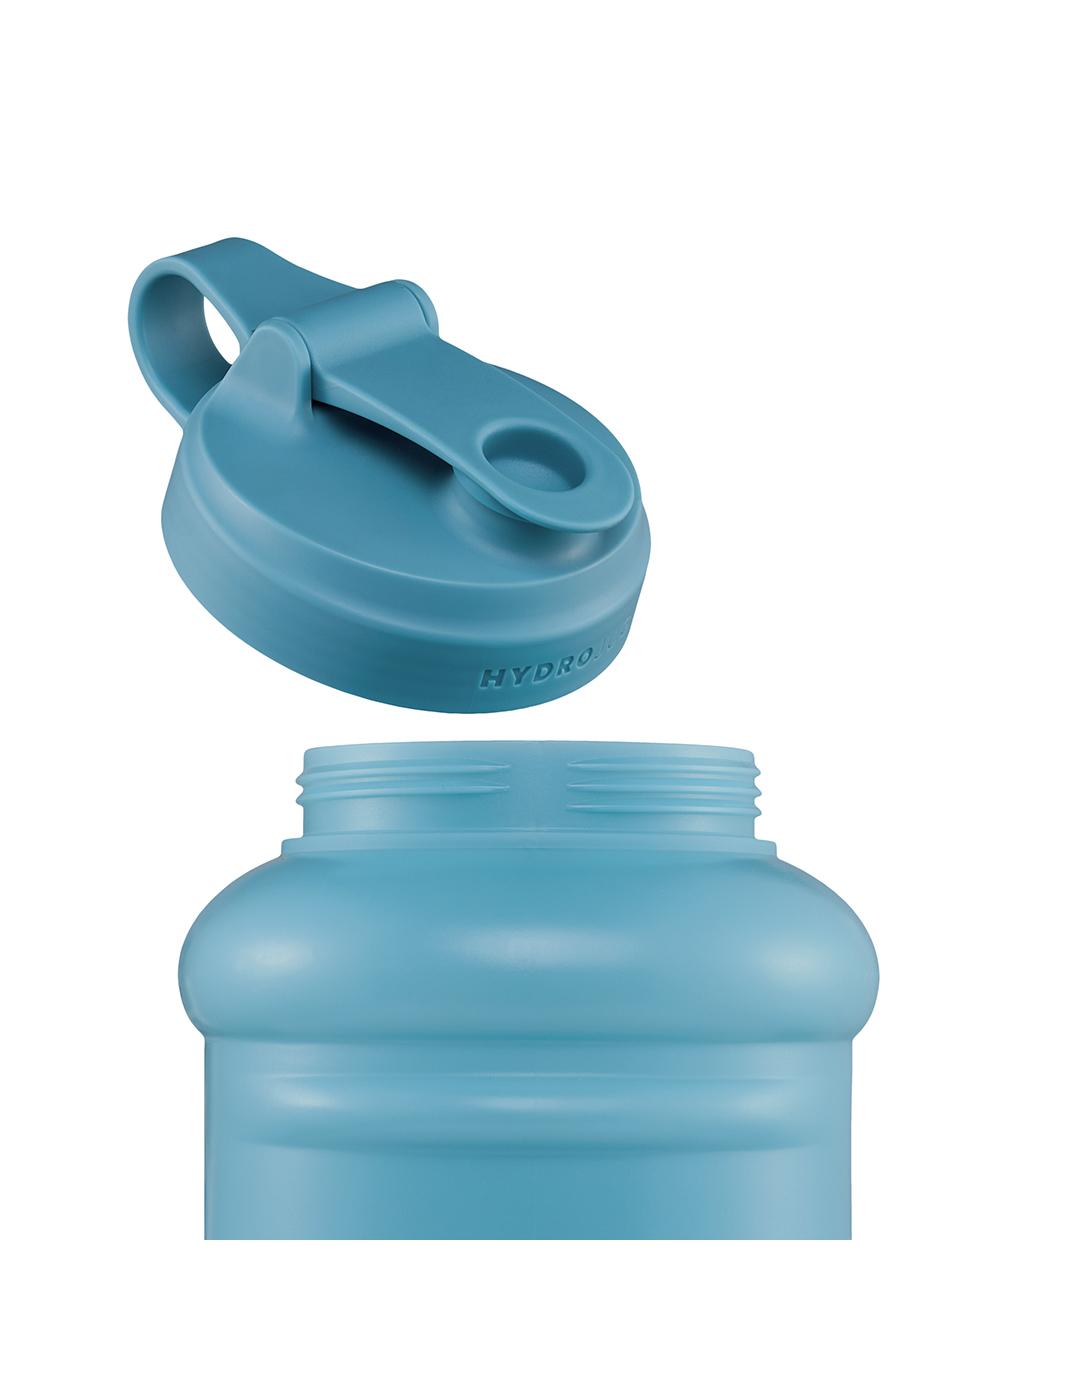 Reduce HydroPro Stainless Steel Kids Water Bottle - Nautical - Shop Travel  & To-Go at H-E-B